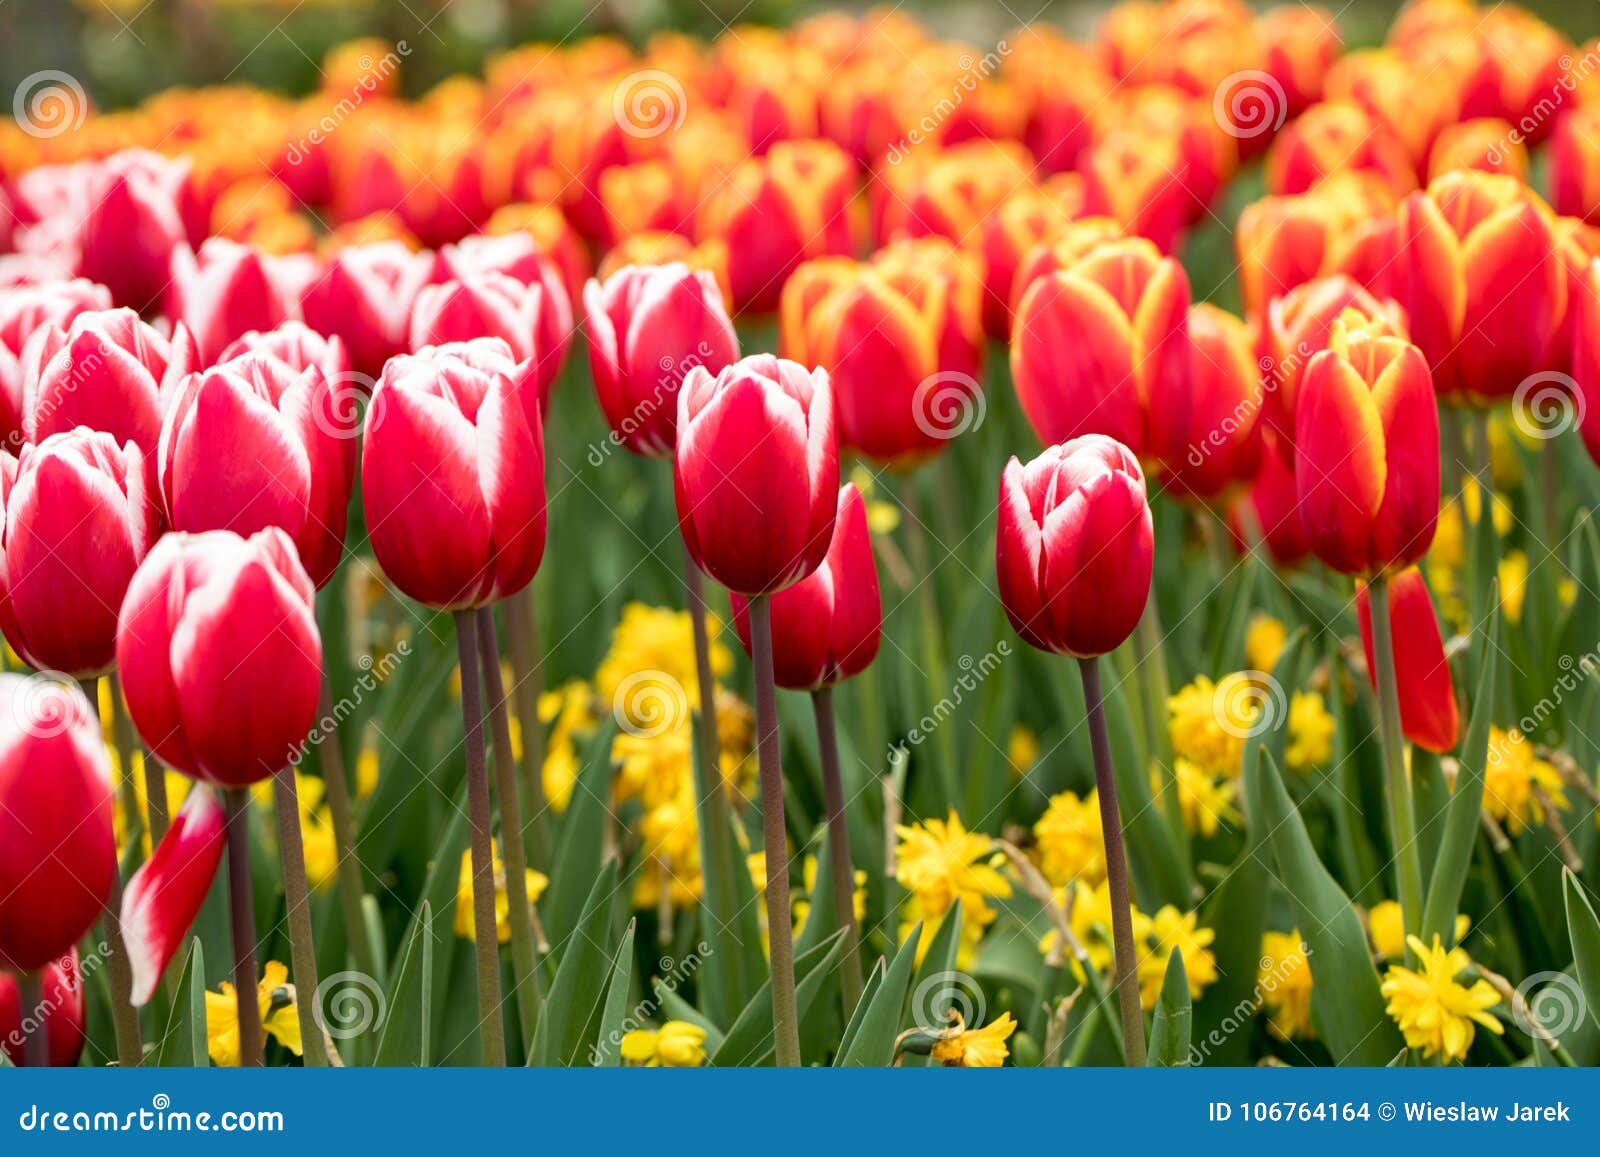 Colorful Tulips and Daffodils Blooming in a Garden. Stock Photo - Image ...